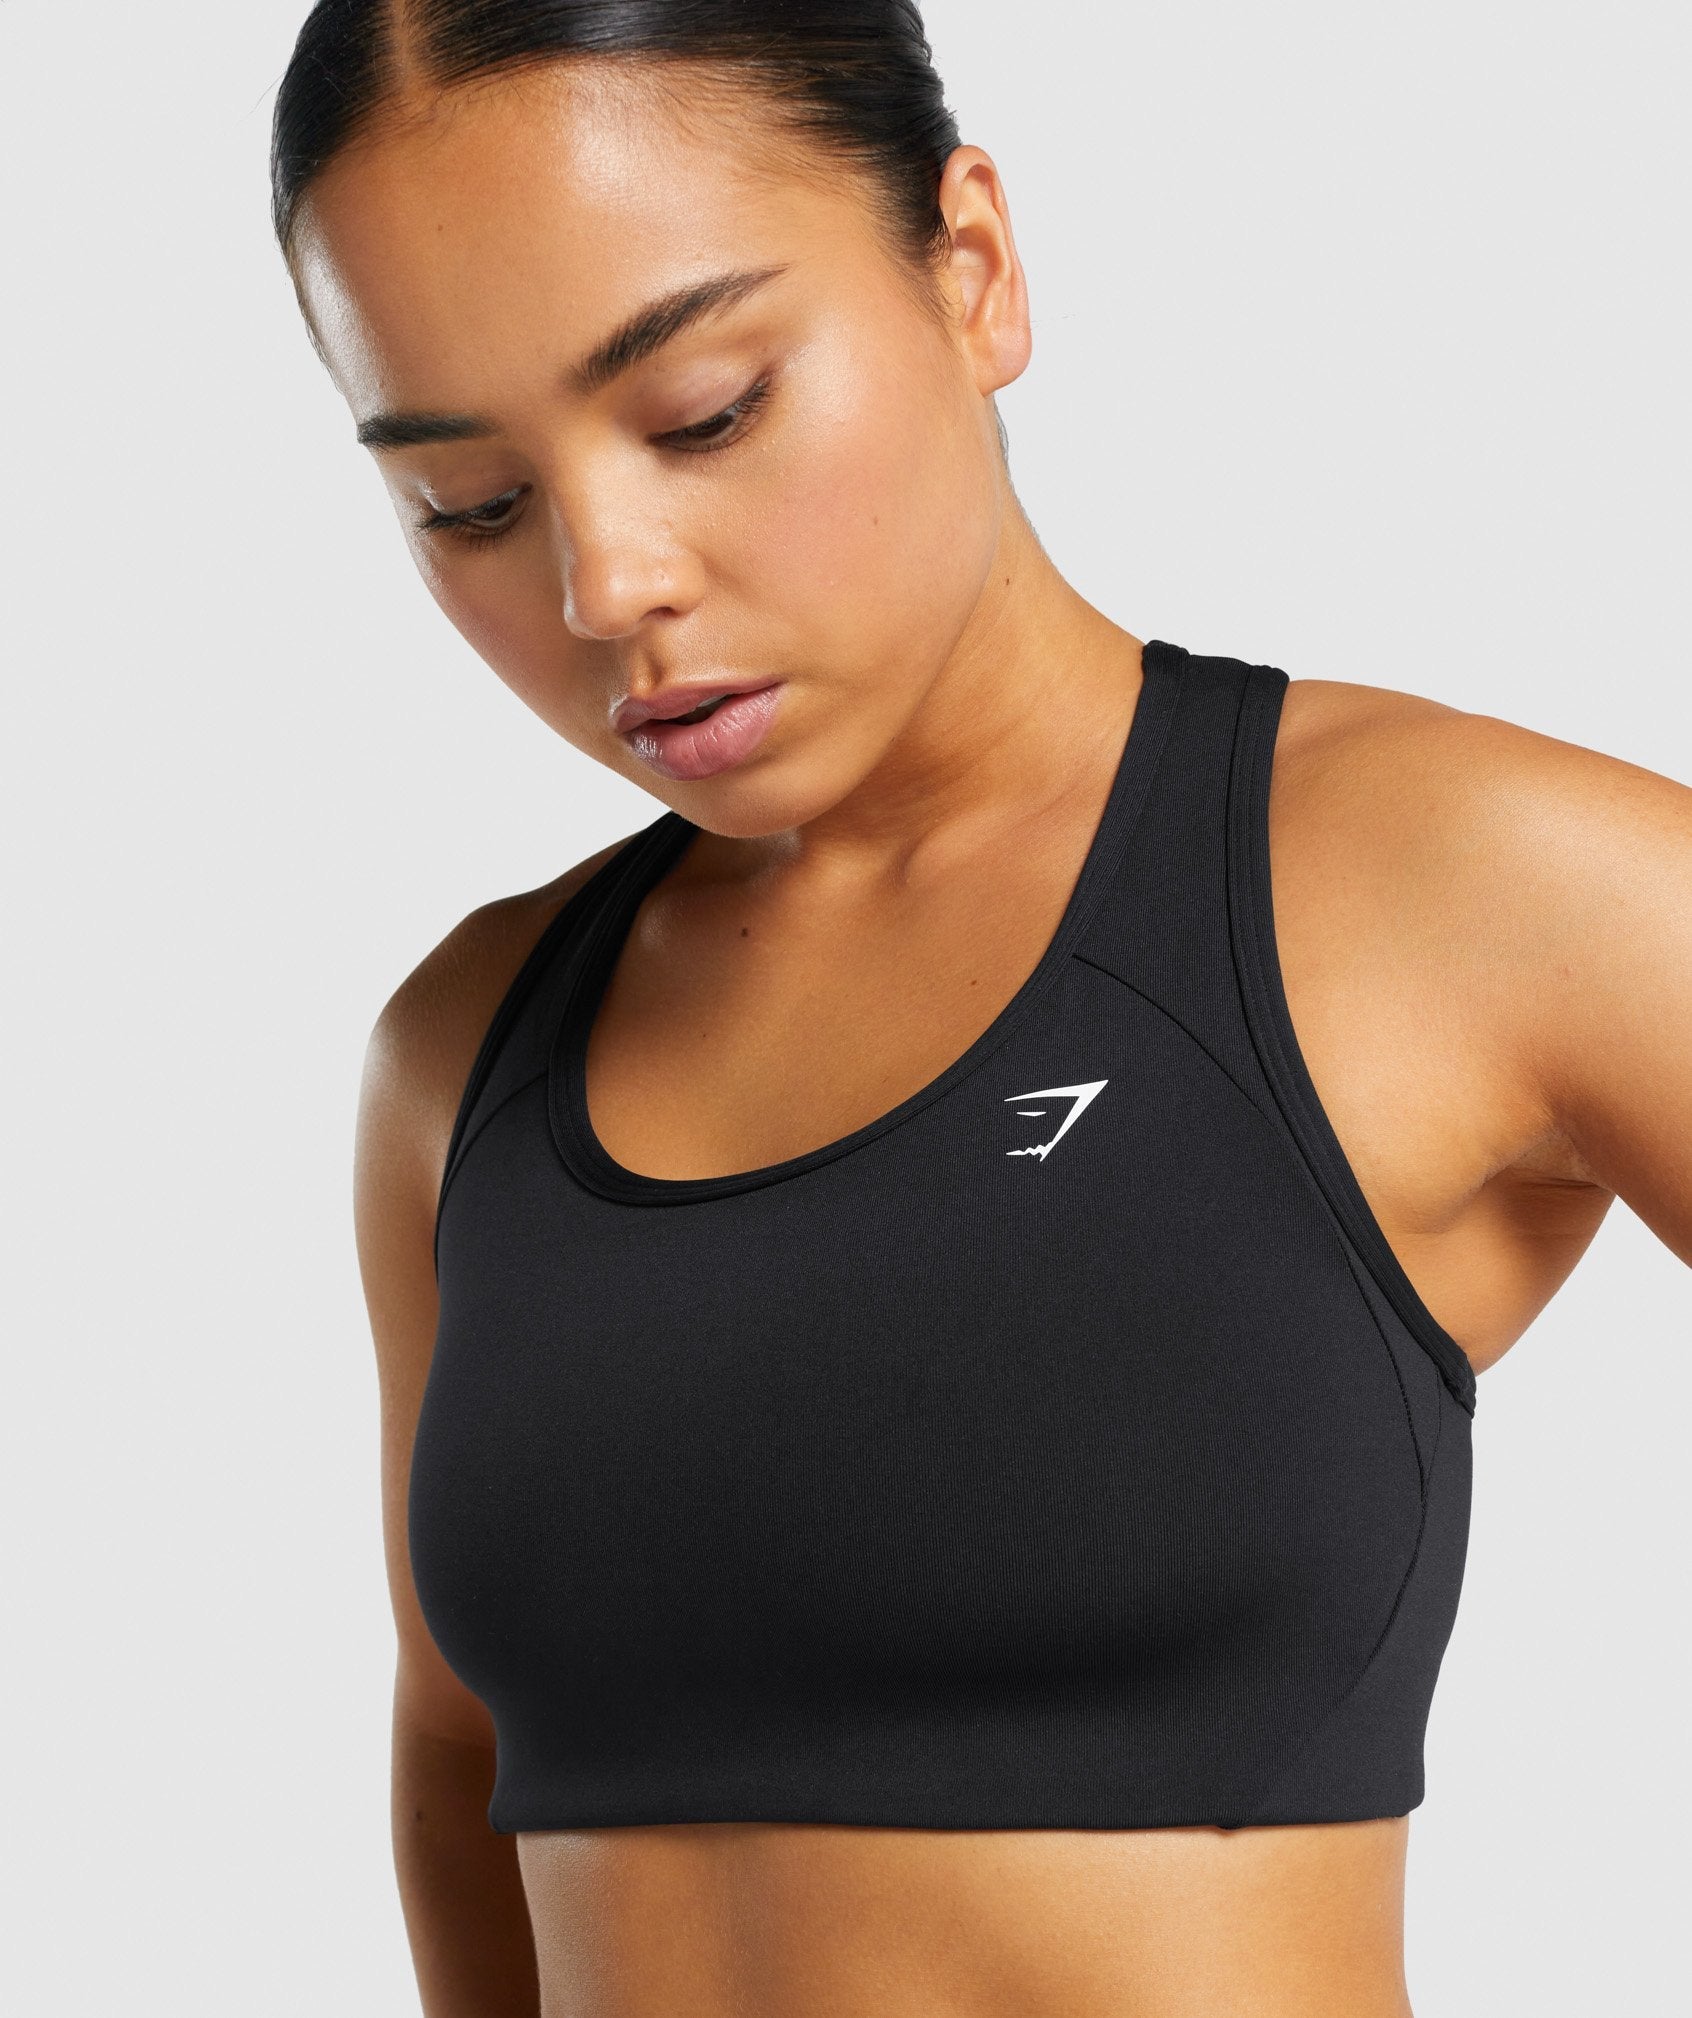 Essential Racer Back Sports Bra in Black - view 5